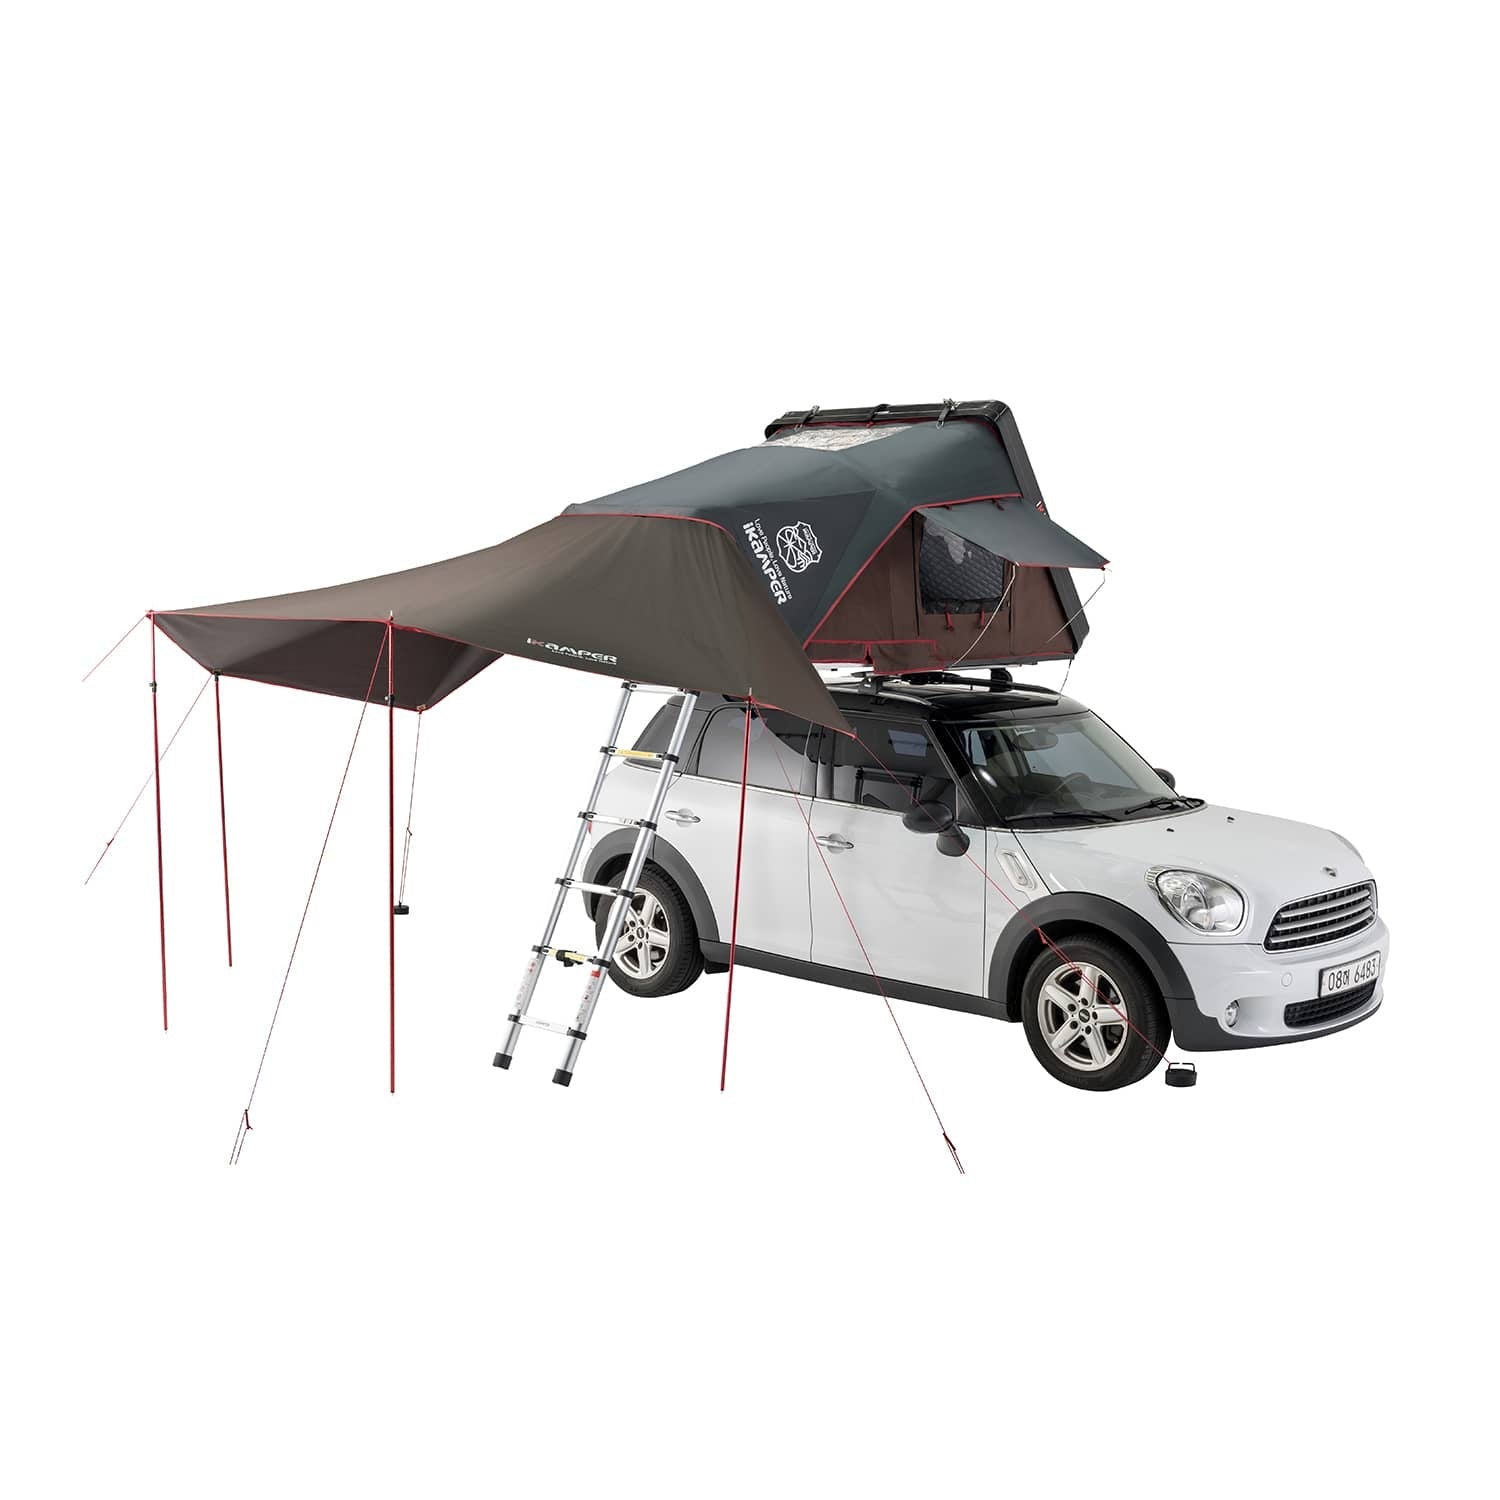 Practical - a roof tent or rear tent for the car